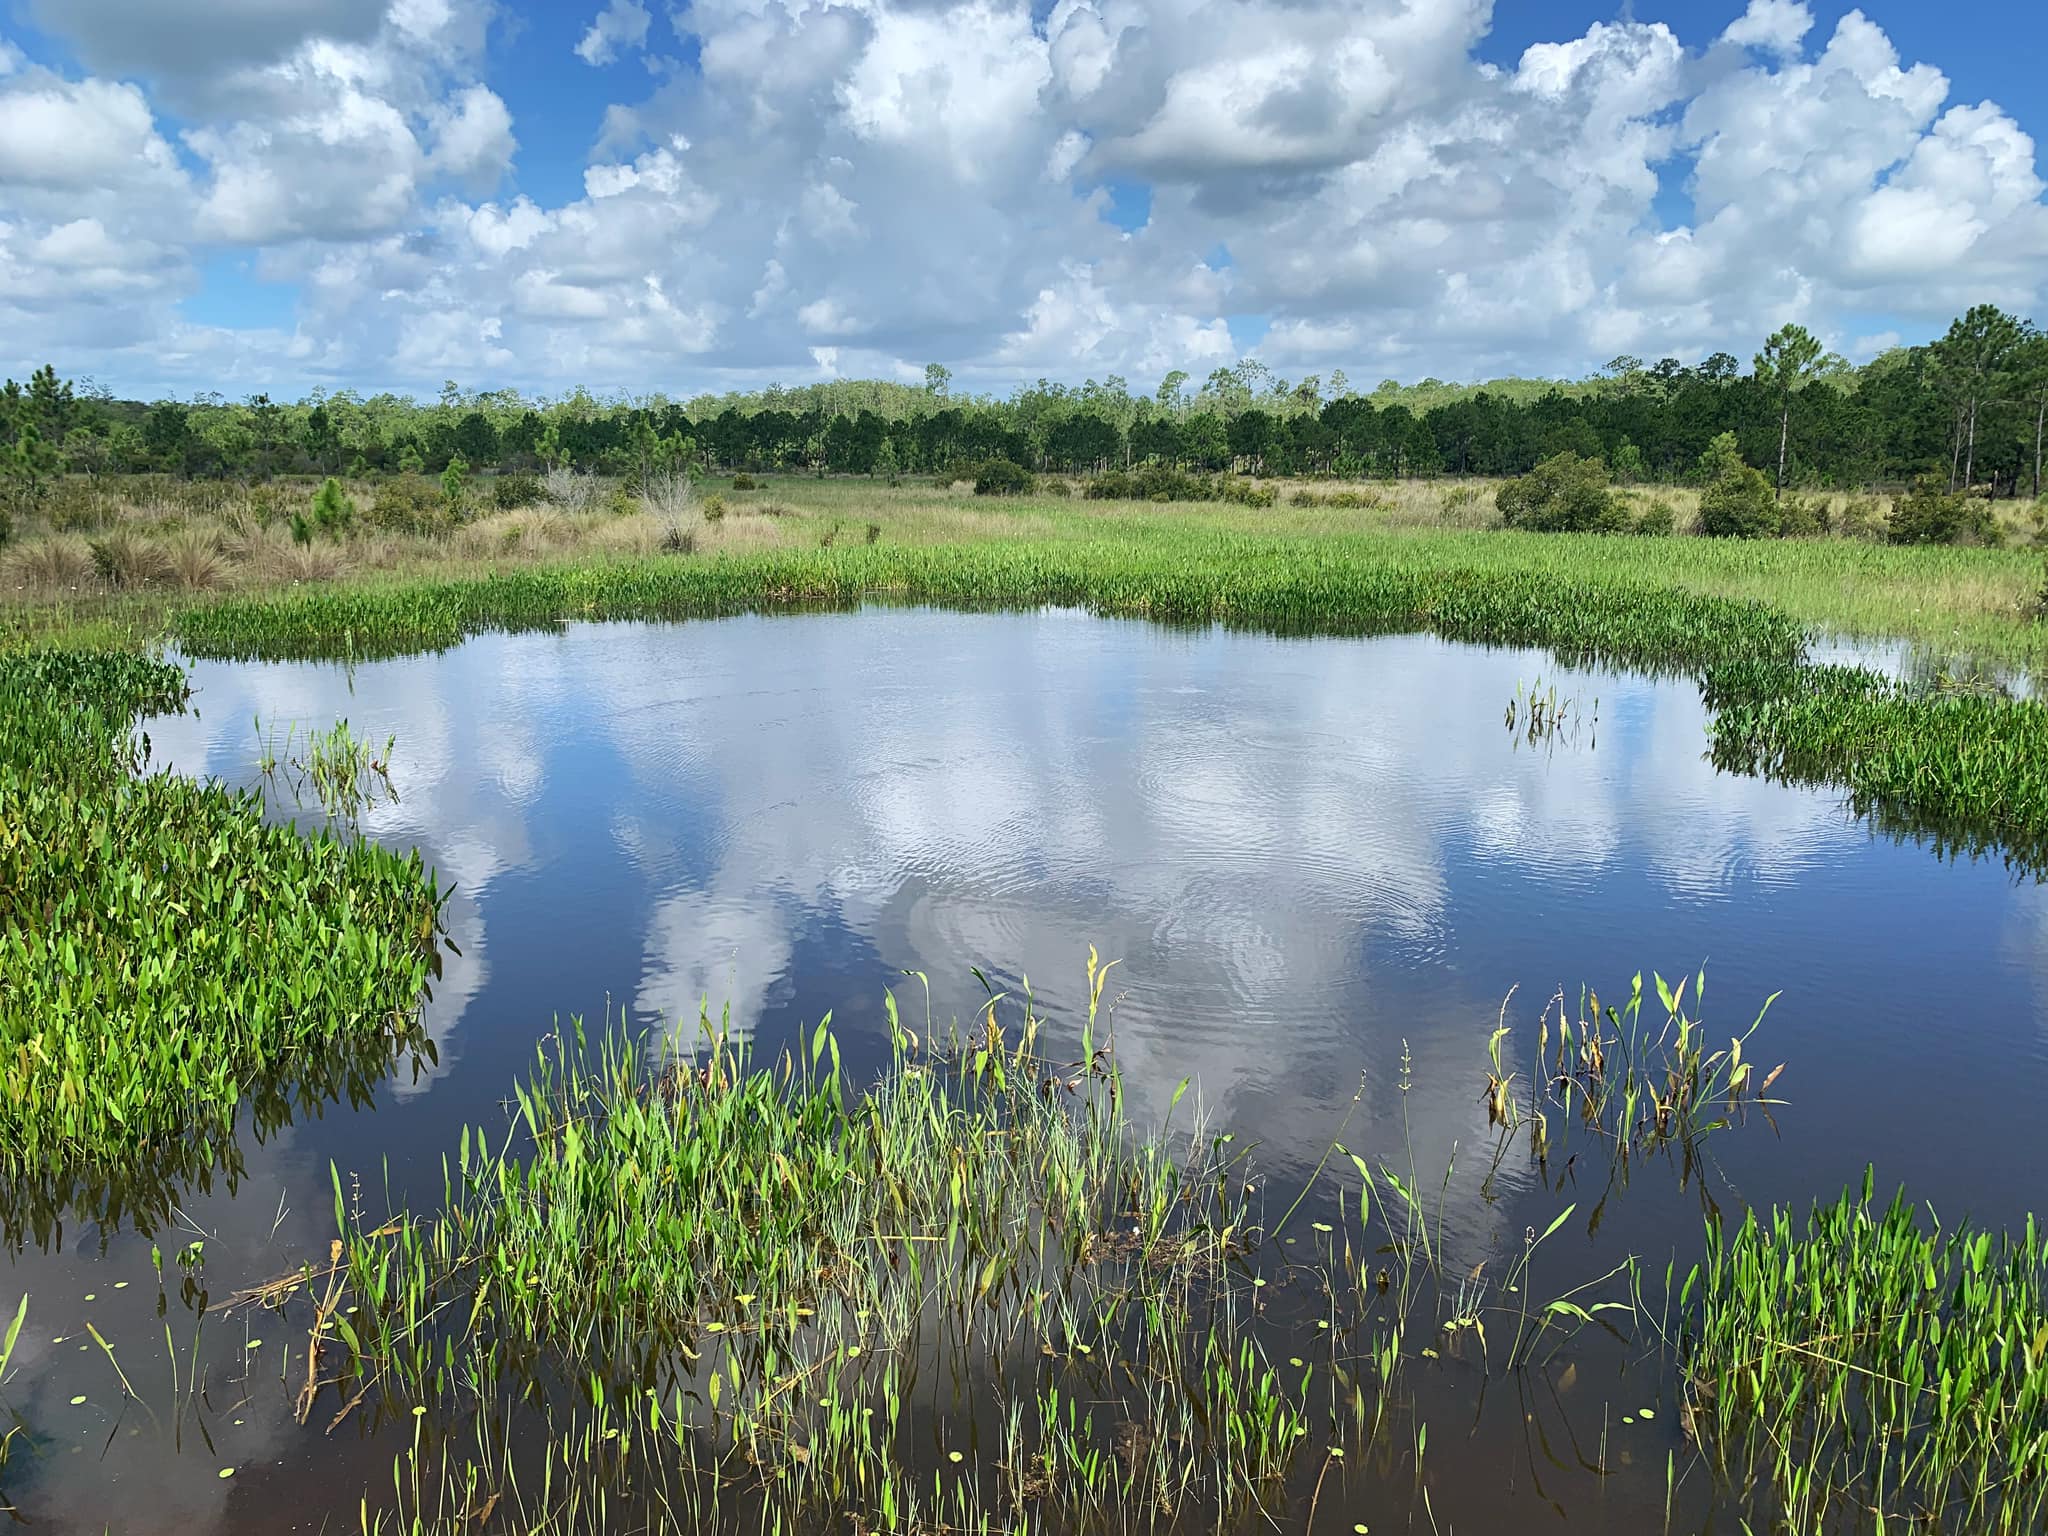 A view of a wetland surrounded by green vegetation